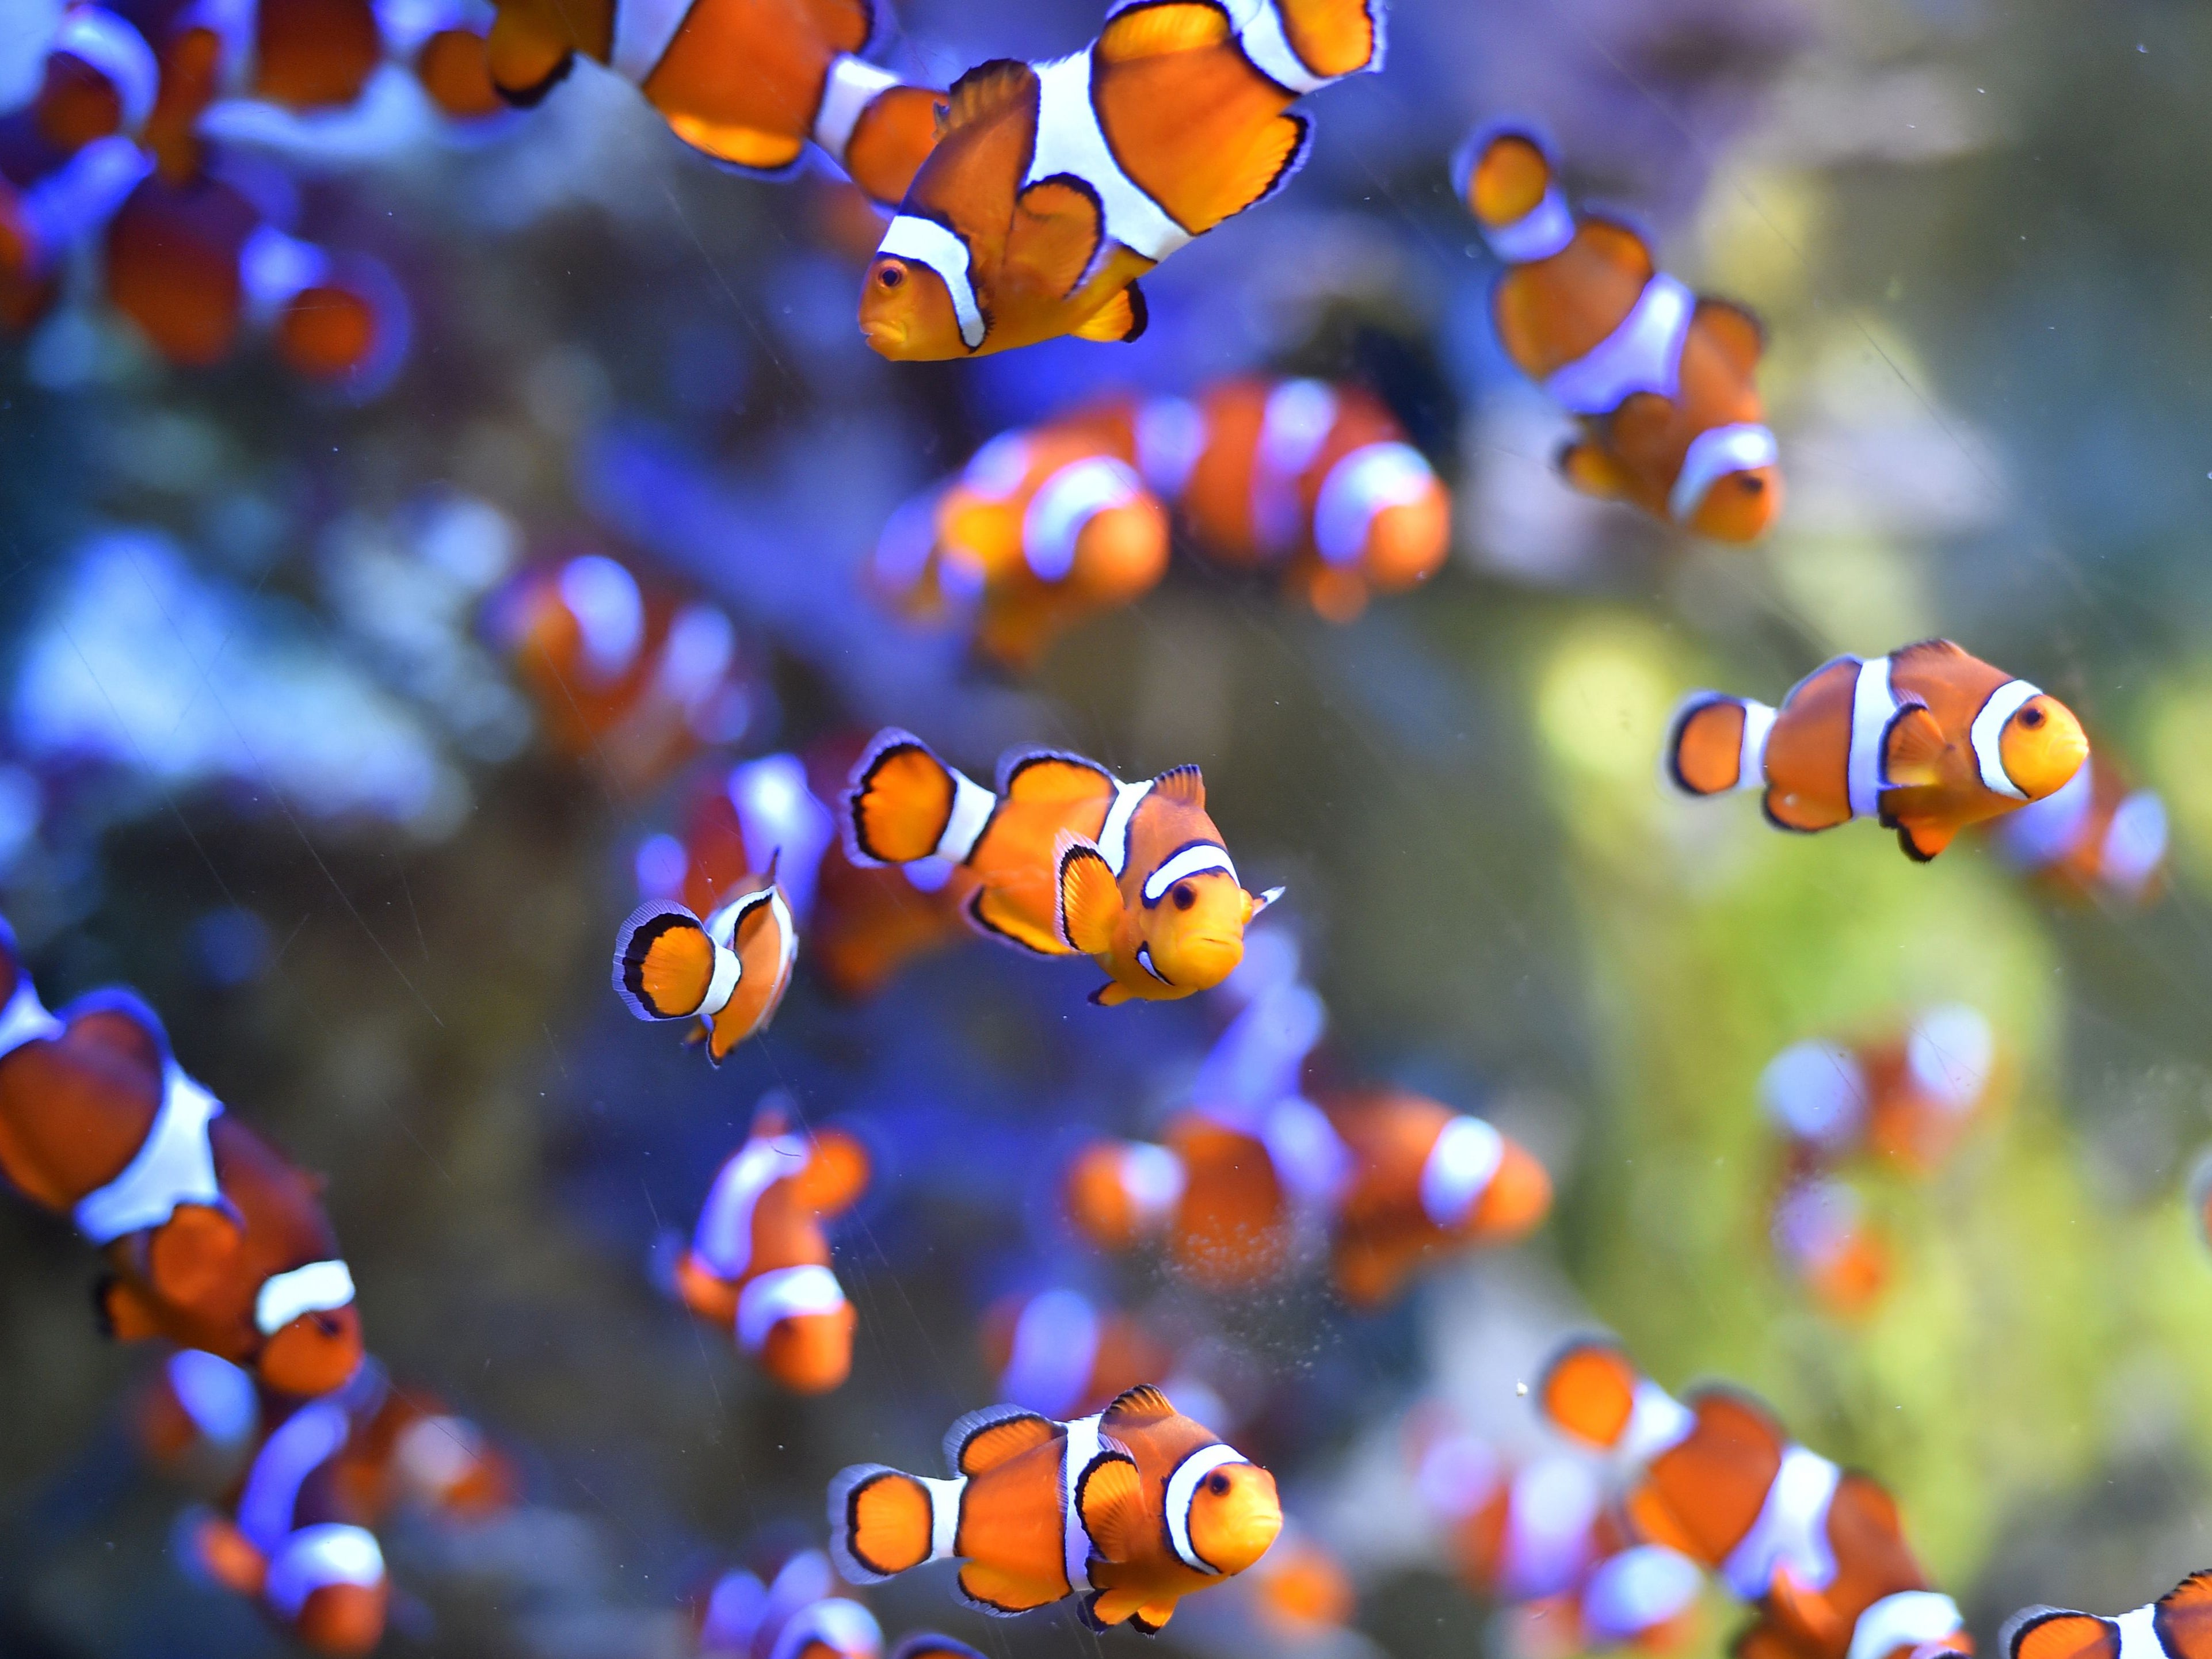 Clownfish swim at the Ocearium in Le Croisic, western France, on 6 December 2016